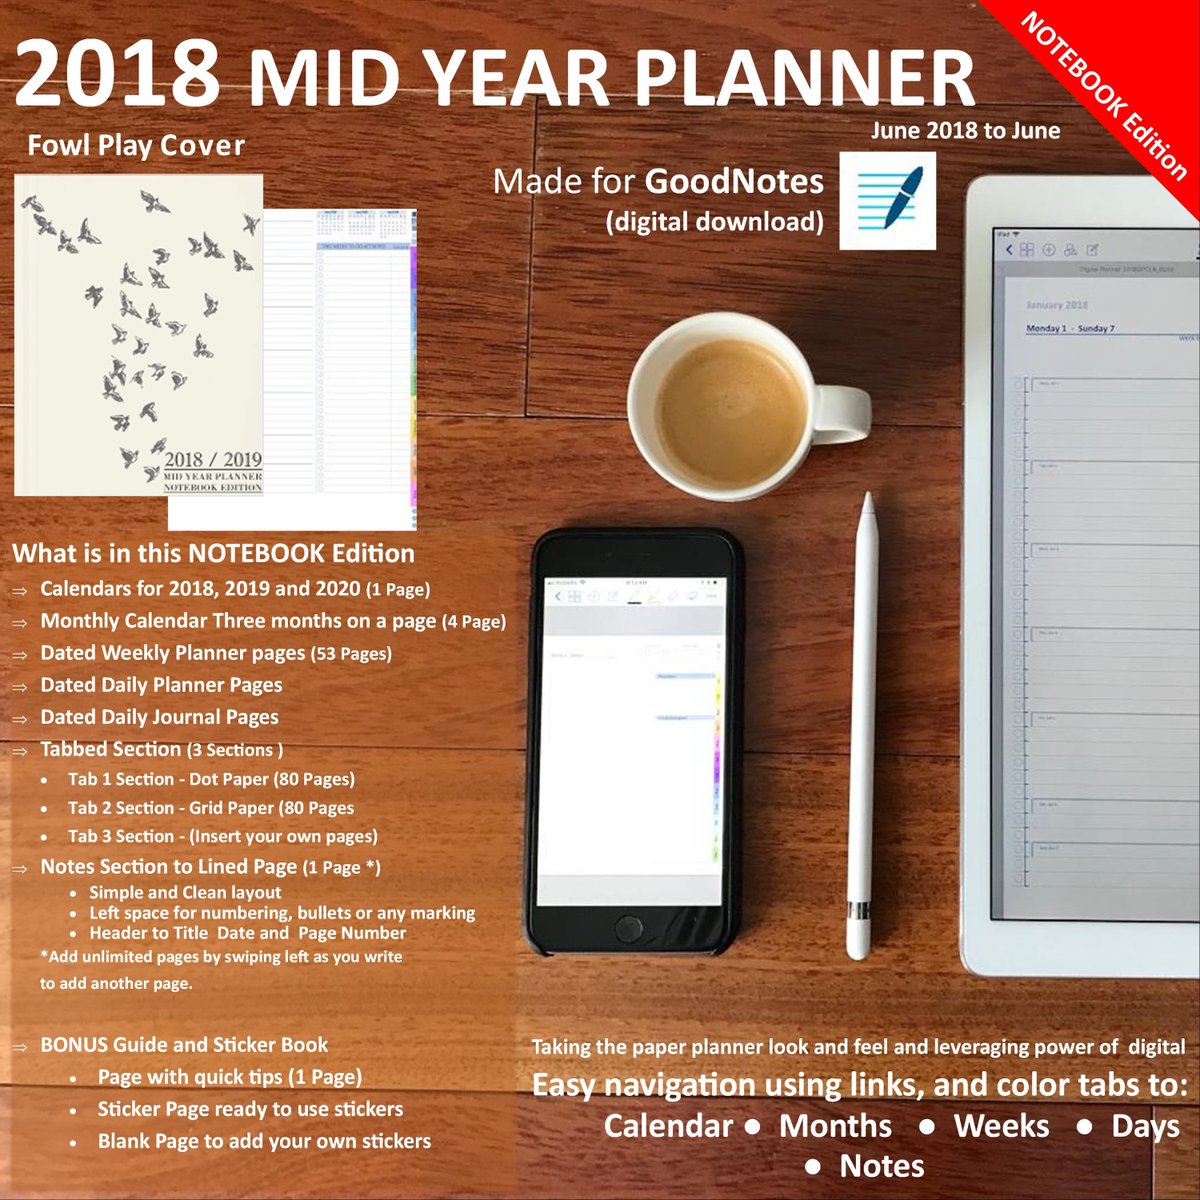 my #etsyshop: 2018 Mid-Year Planner NOTEBOOK Edition (FOWL PLAY Cover) (Made for GoodNotes) etsy.me/2n2GG7q #papergoods #calendar #goodnotesapp #productivity #ipad #bulletjournal #daily #journal #planner # notes #conference #conferenceplanning #deskgoal